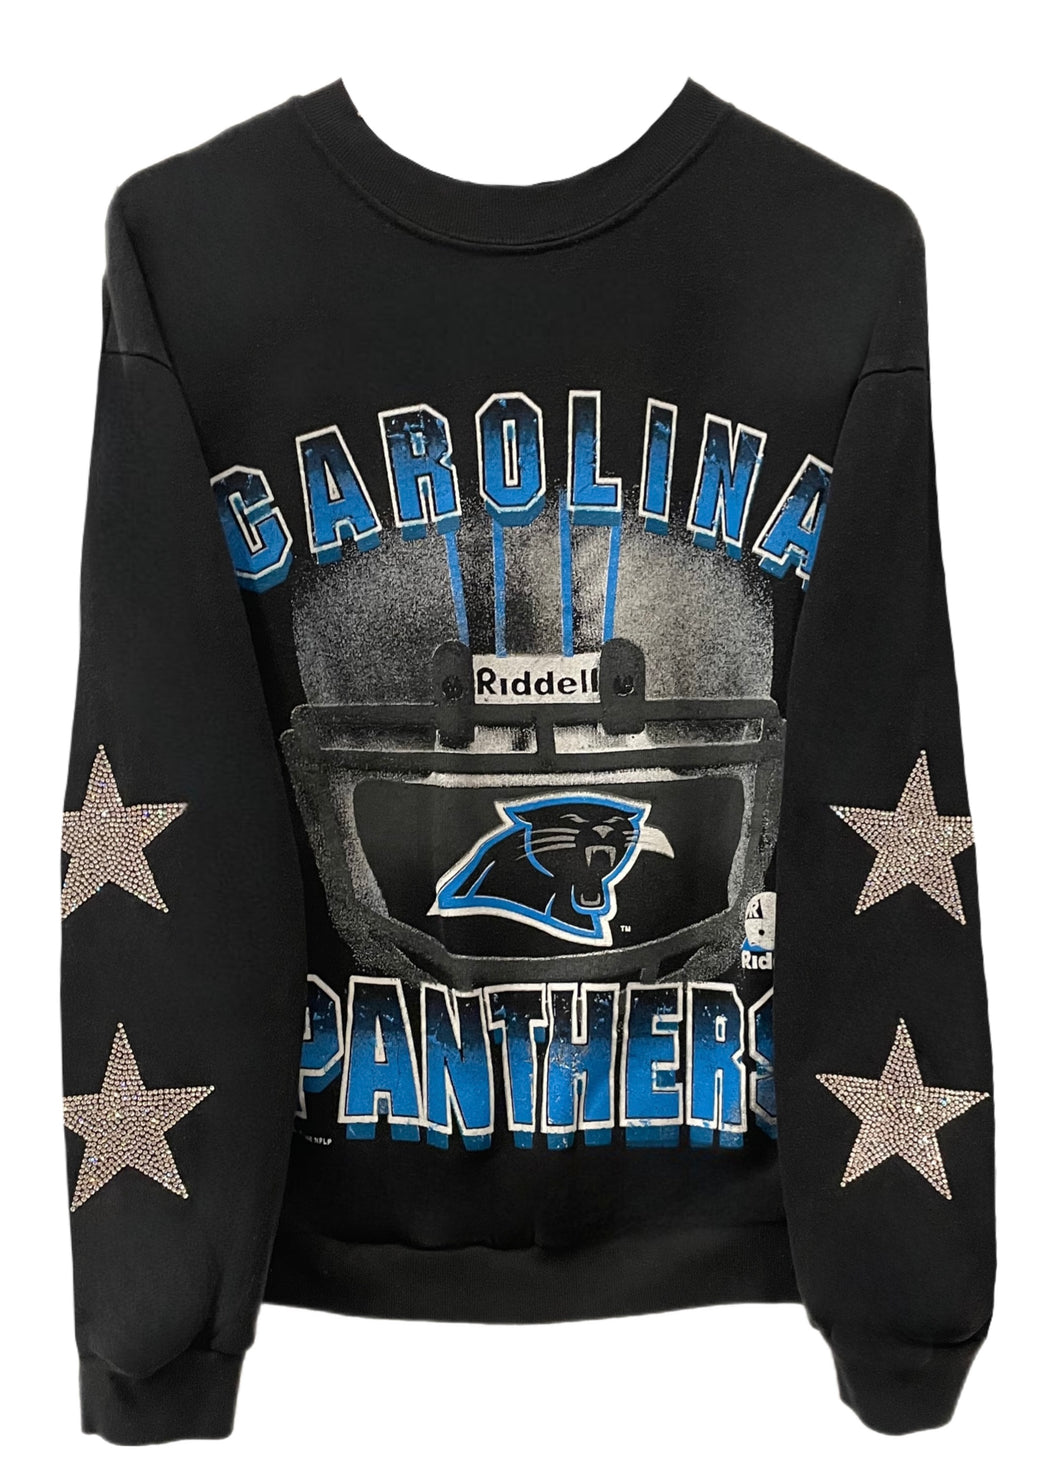 Carolina Panthers, Football One of a KIND Vintage Sweatshirt with Crystal Star Design